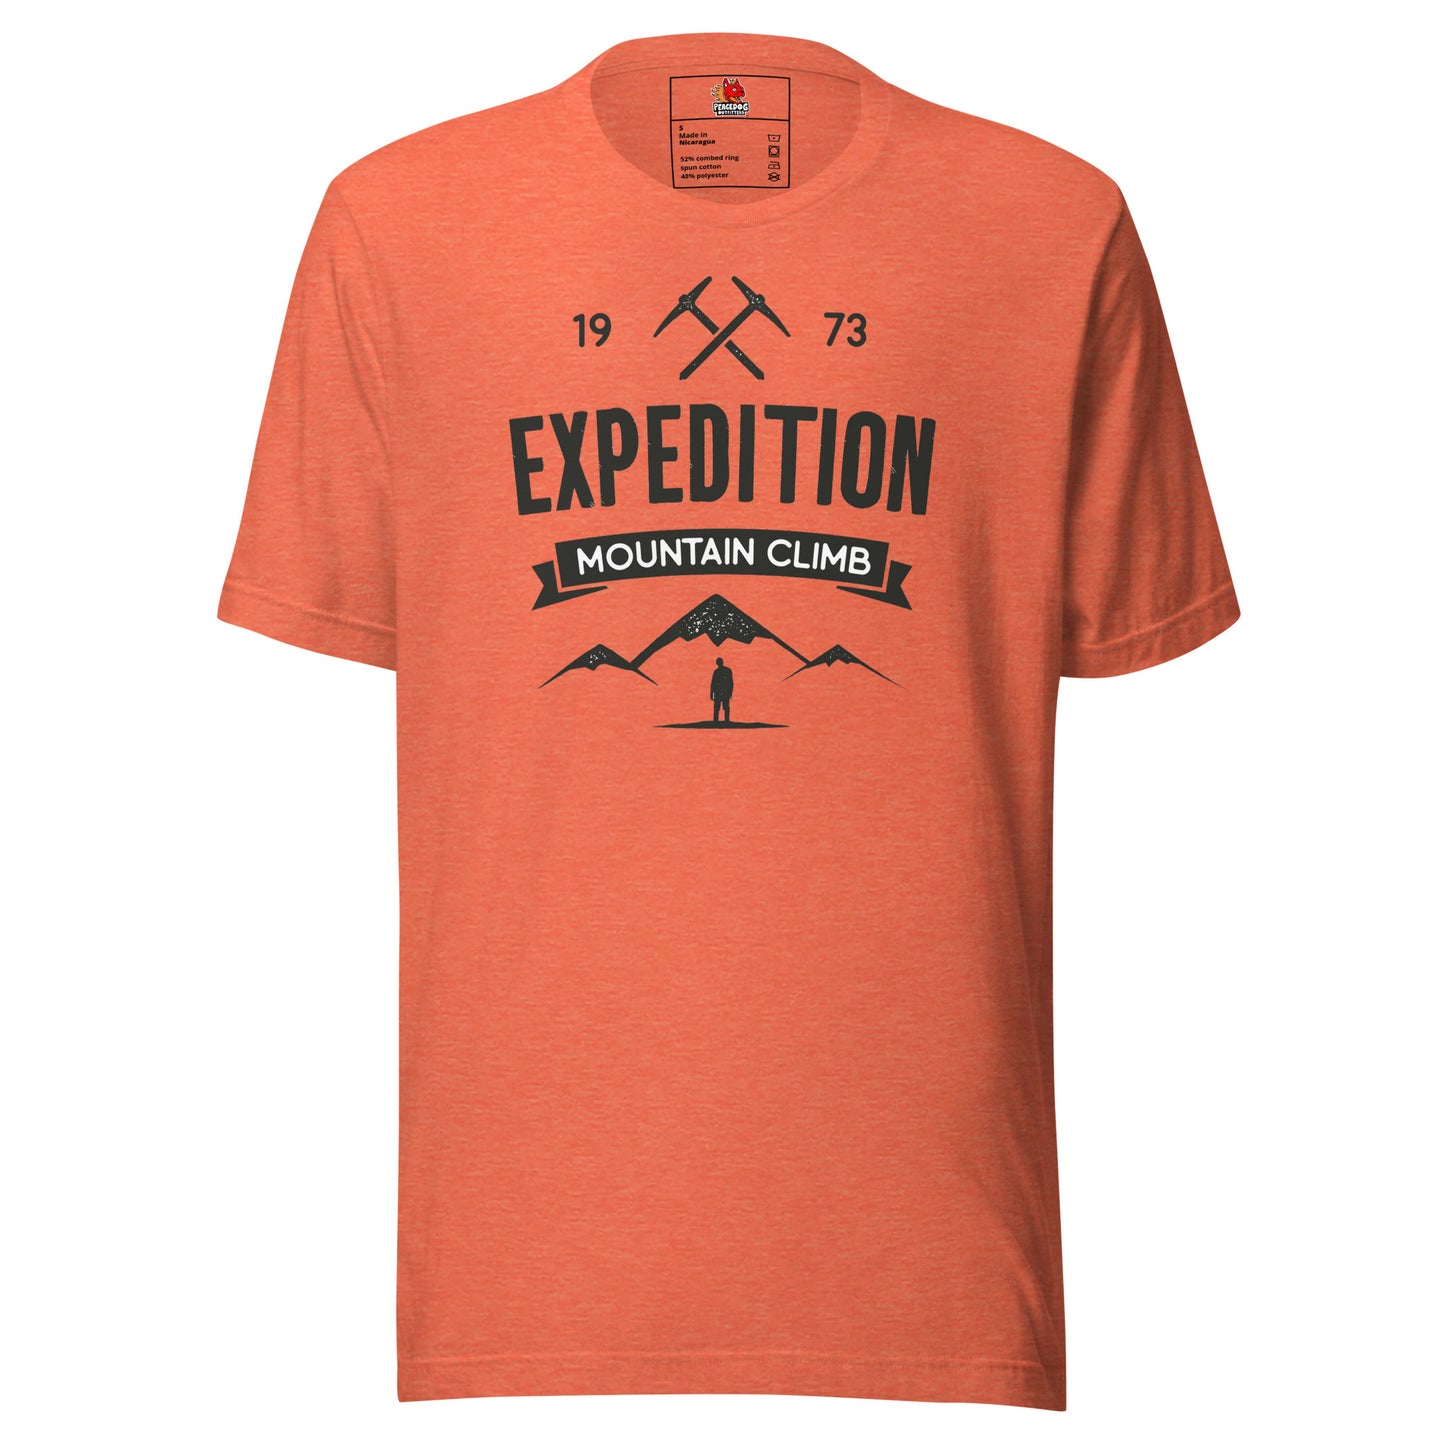 Expedition Mountain Club T-Shirt